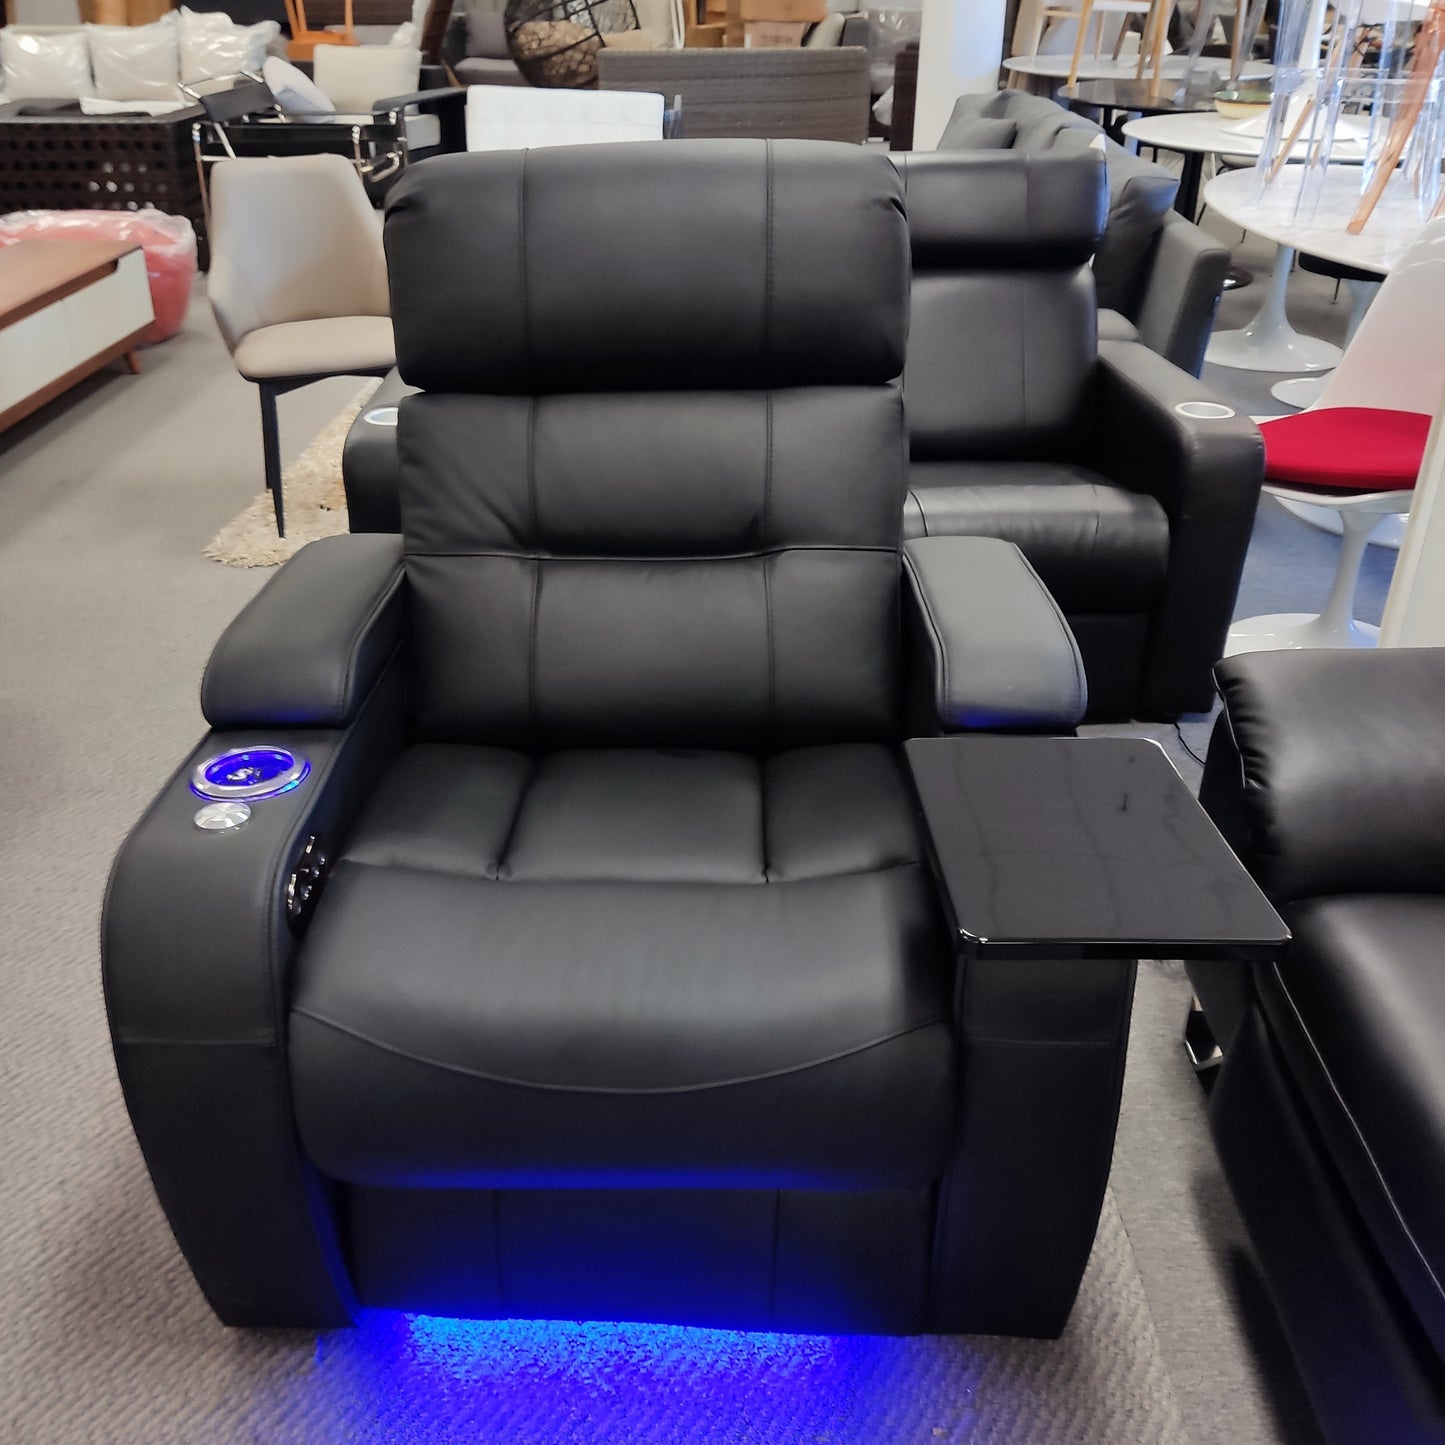 Multufunctional Electric Genuine Leather Home Theatre Seating  #1009B available now